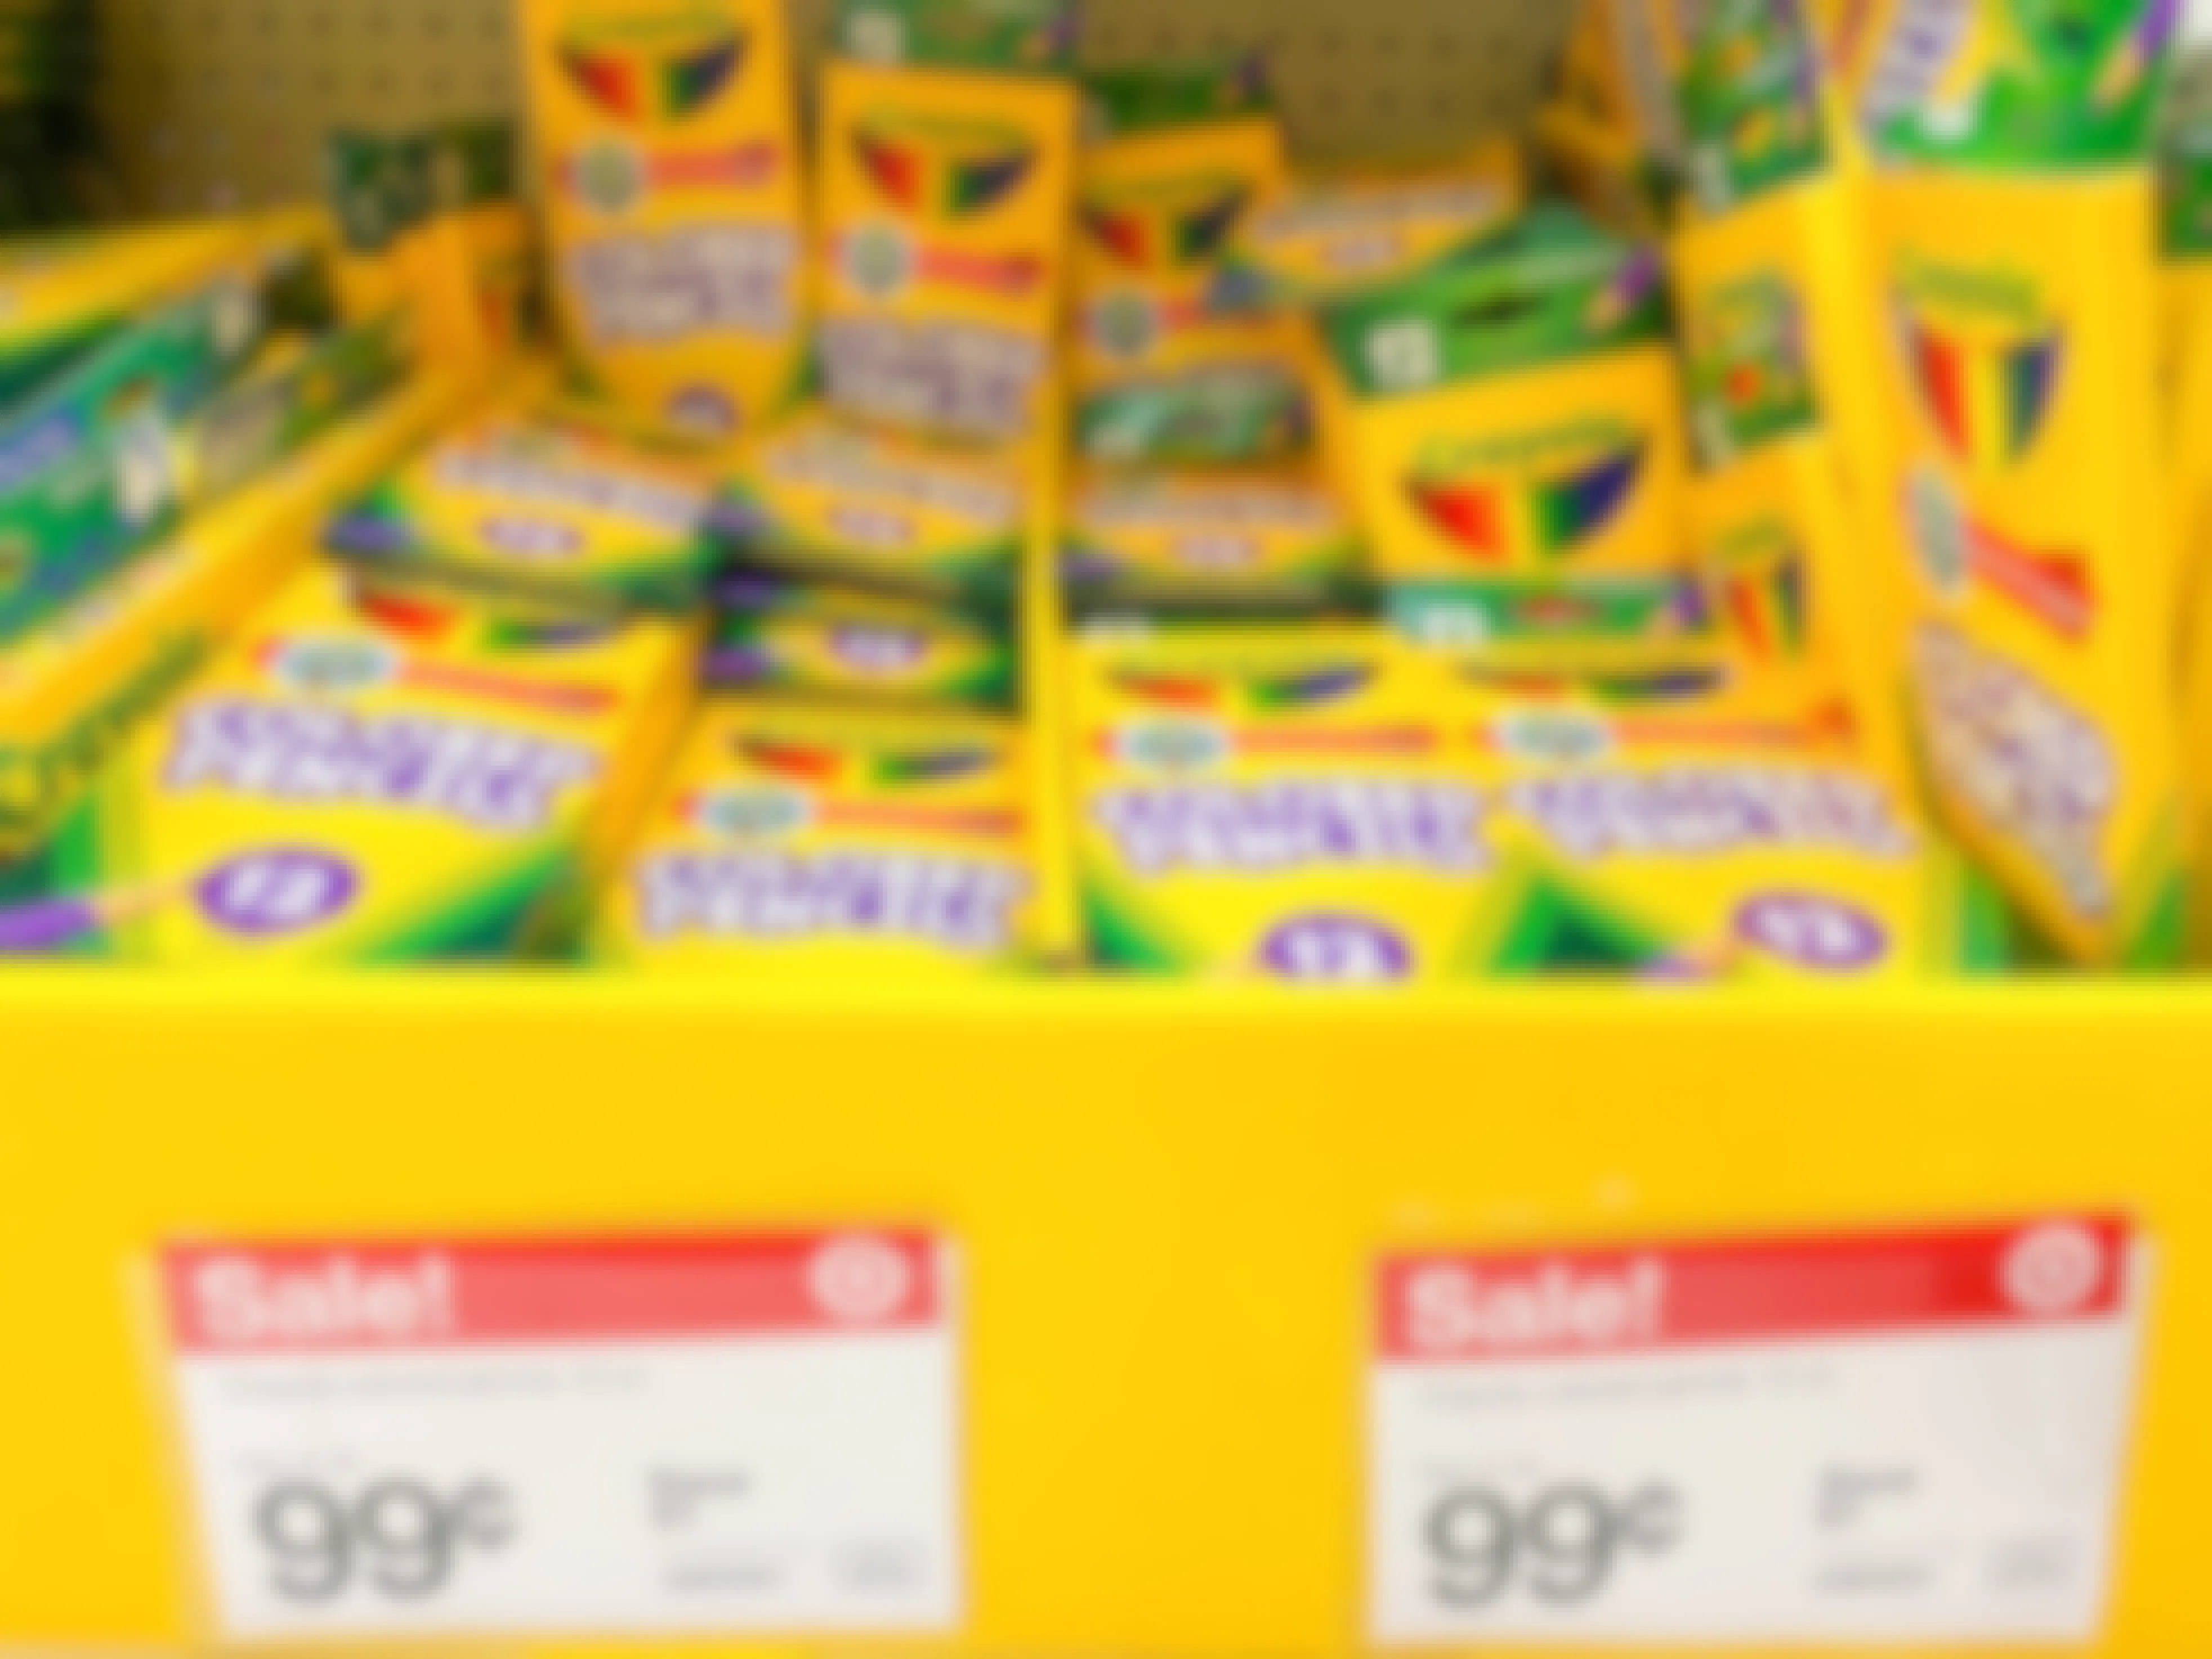 Crayola colored pencils on display at Target with sale signs pricing them at 99 cents.